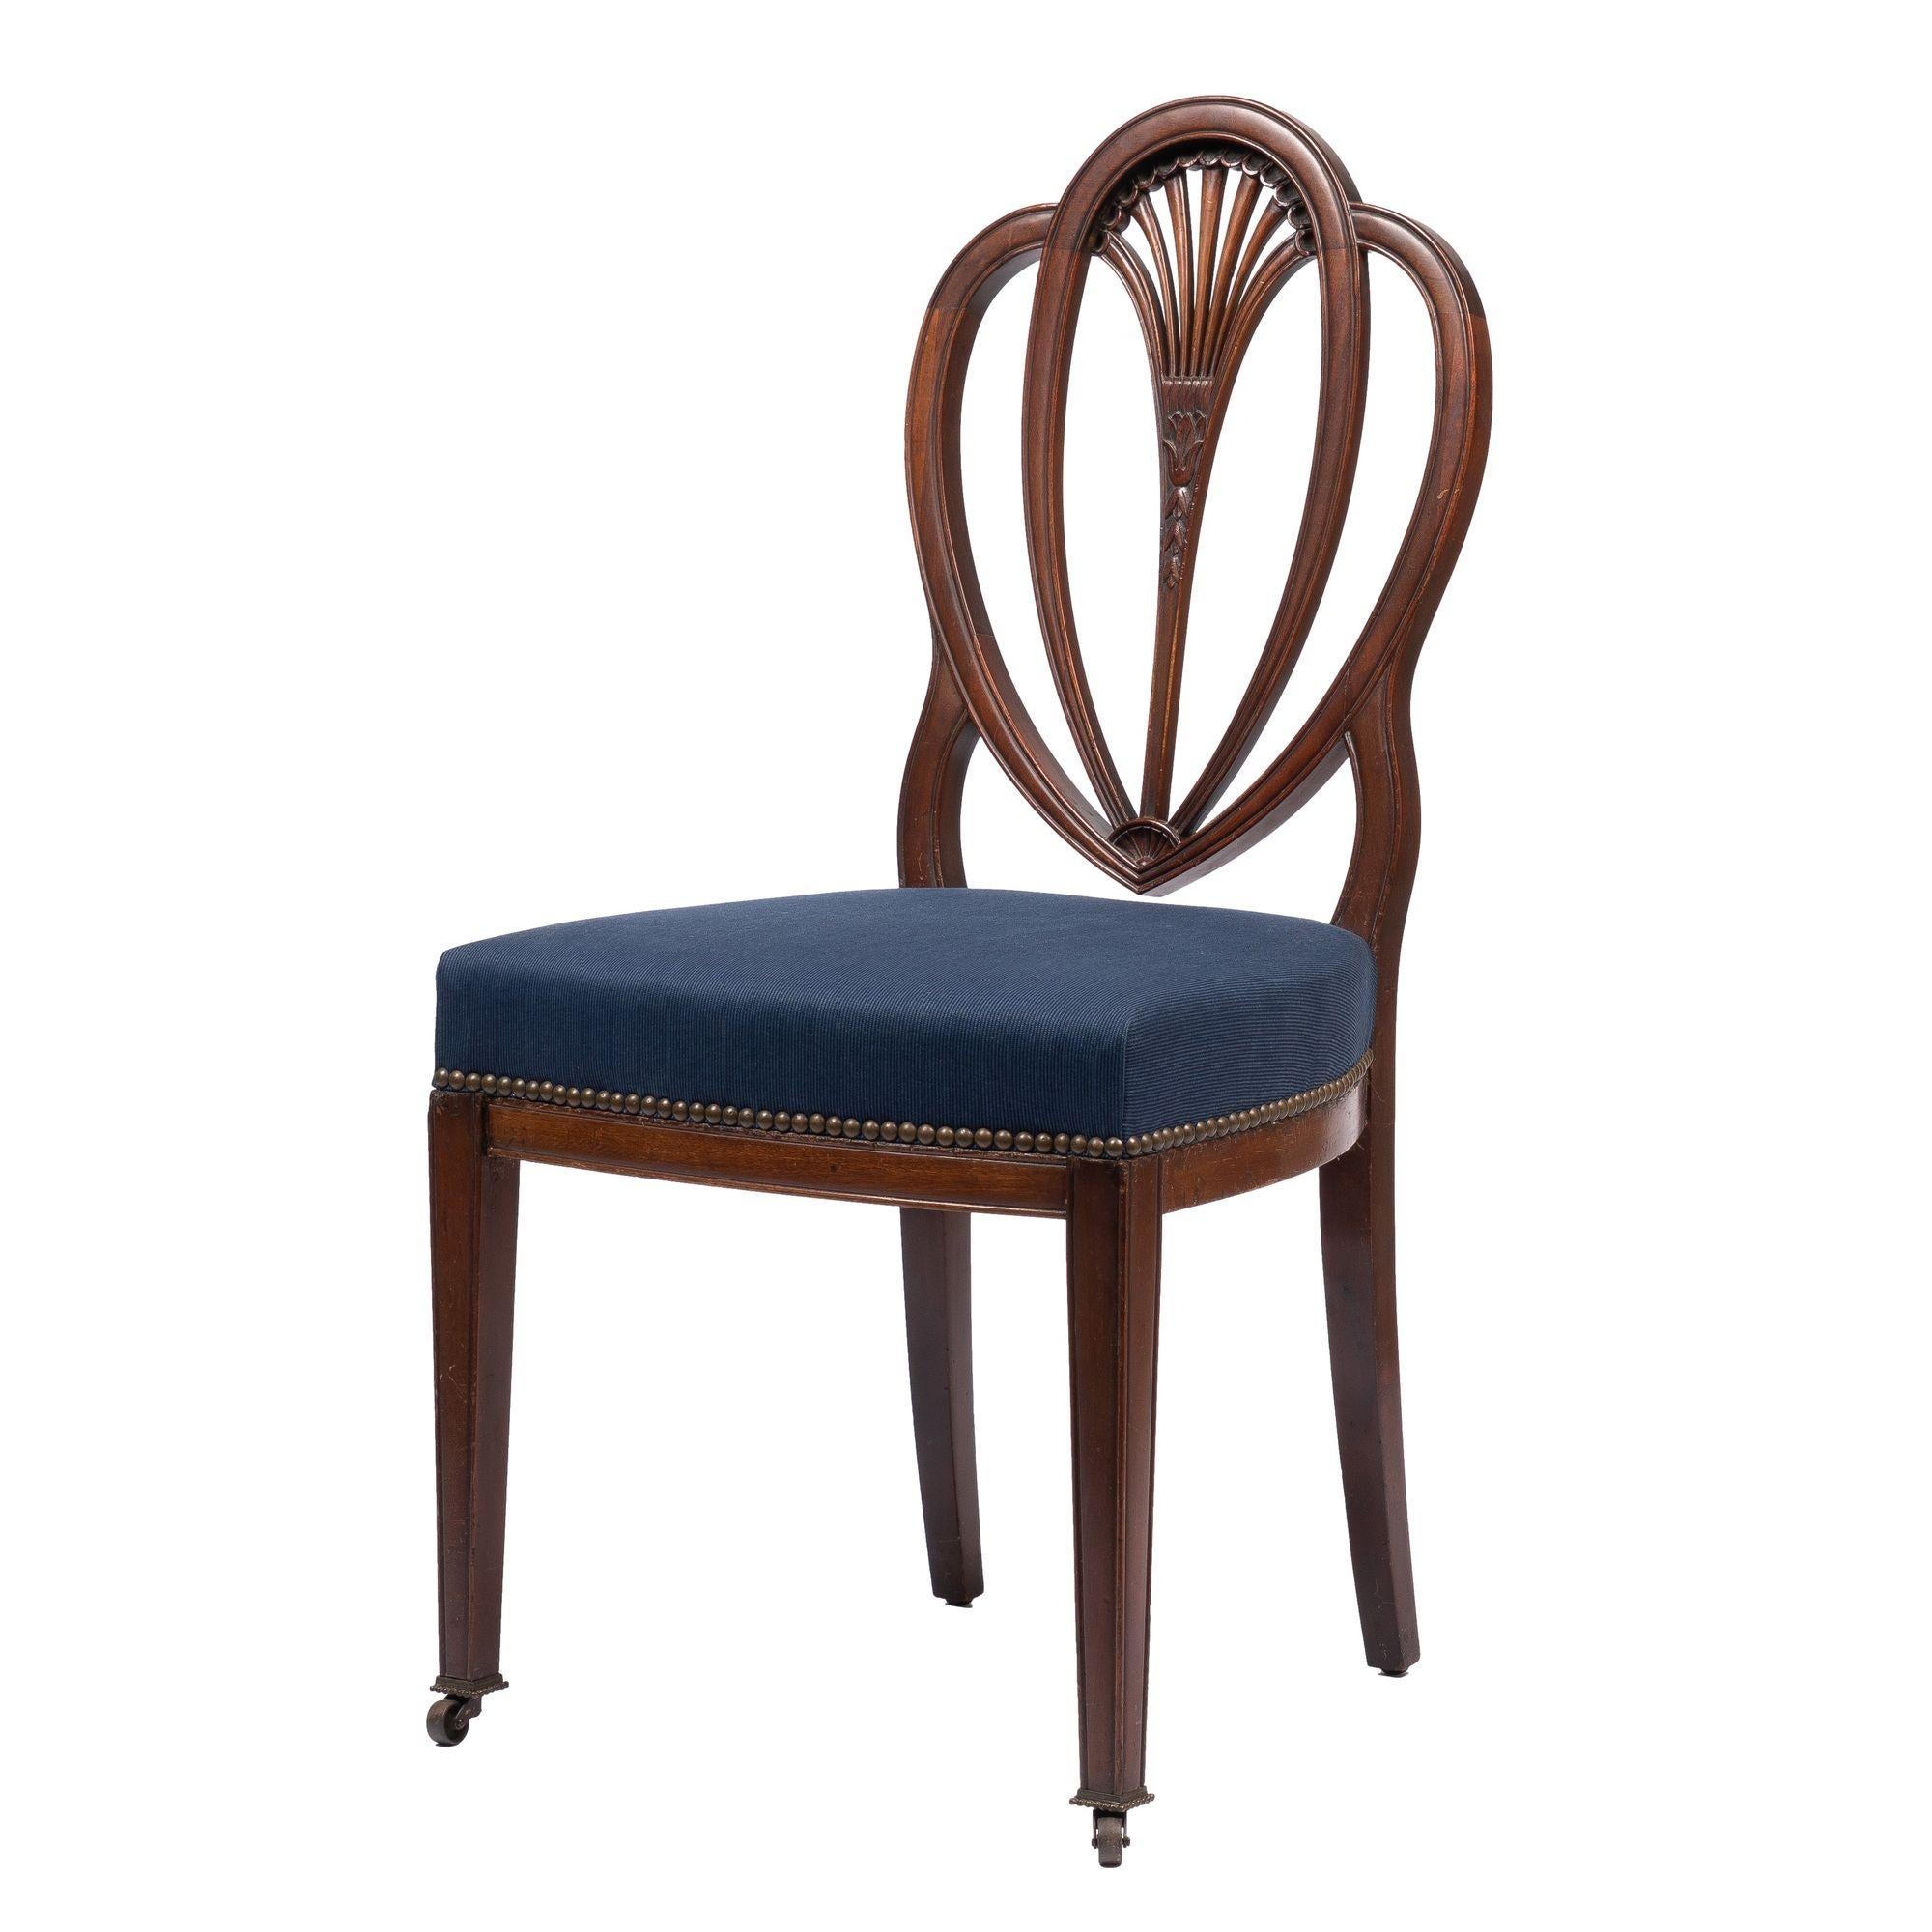 American Pair of Academic Revival Federal Mahogany Heart Back Side Chairs, 1900-25 For Sale